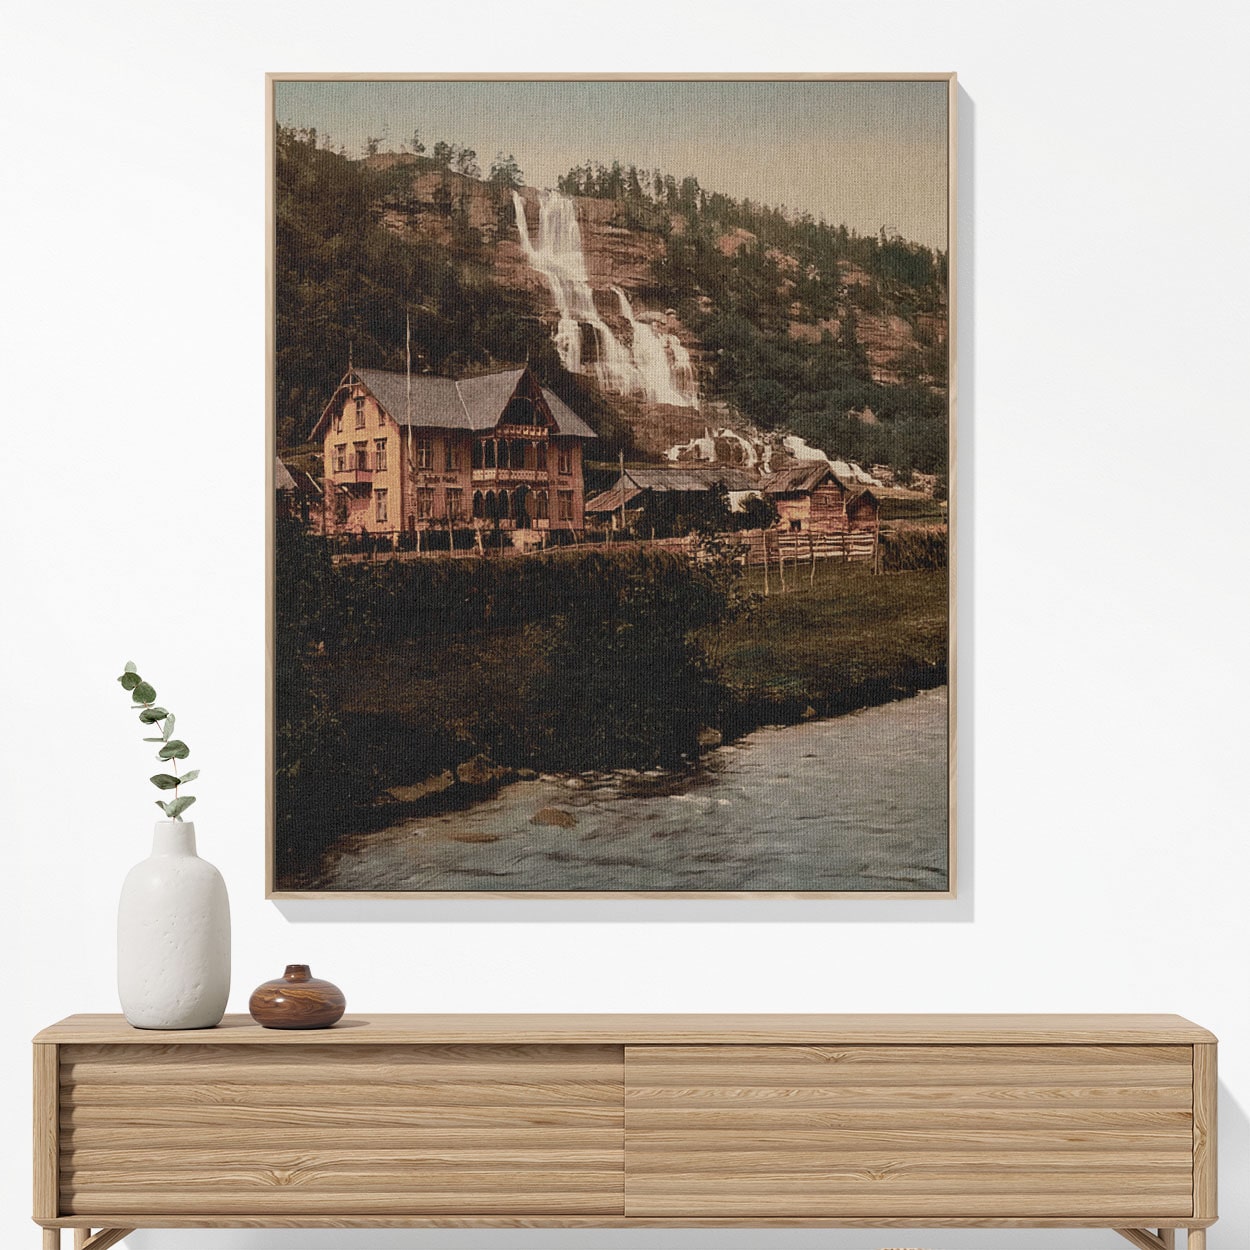 Vintage Mountain River Woven Blanket Woven Blanket Hanging on a Wall as Framed Wall Art